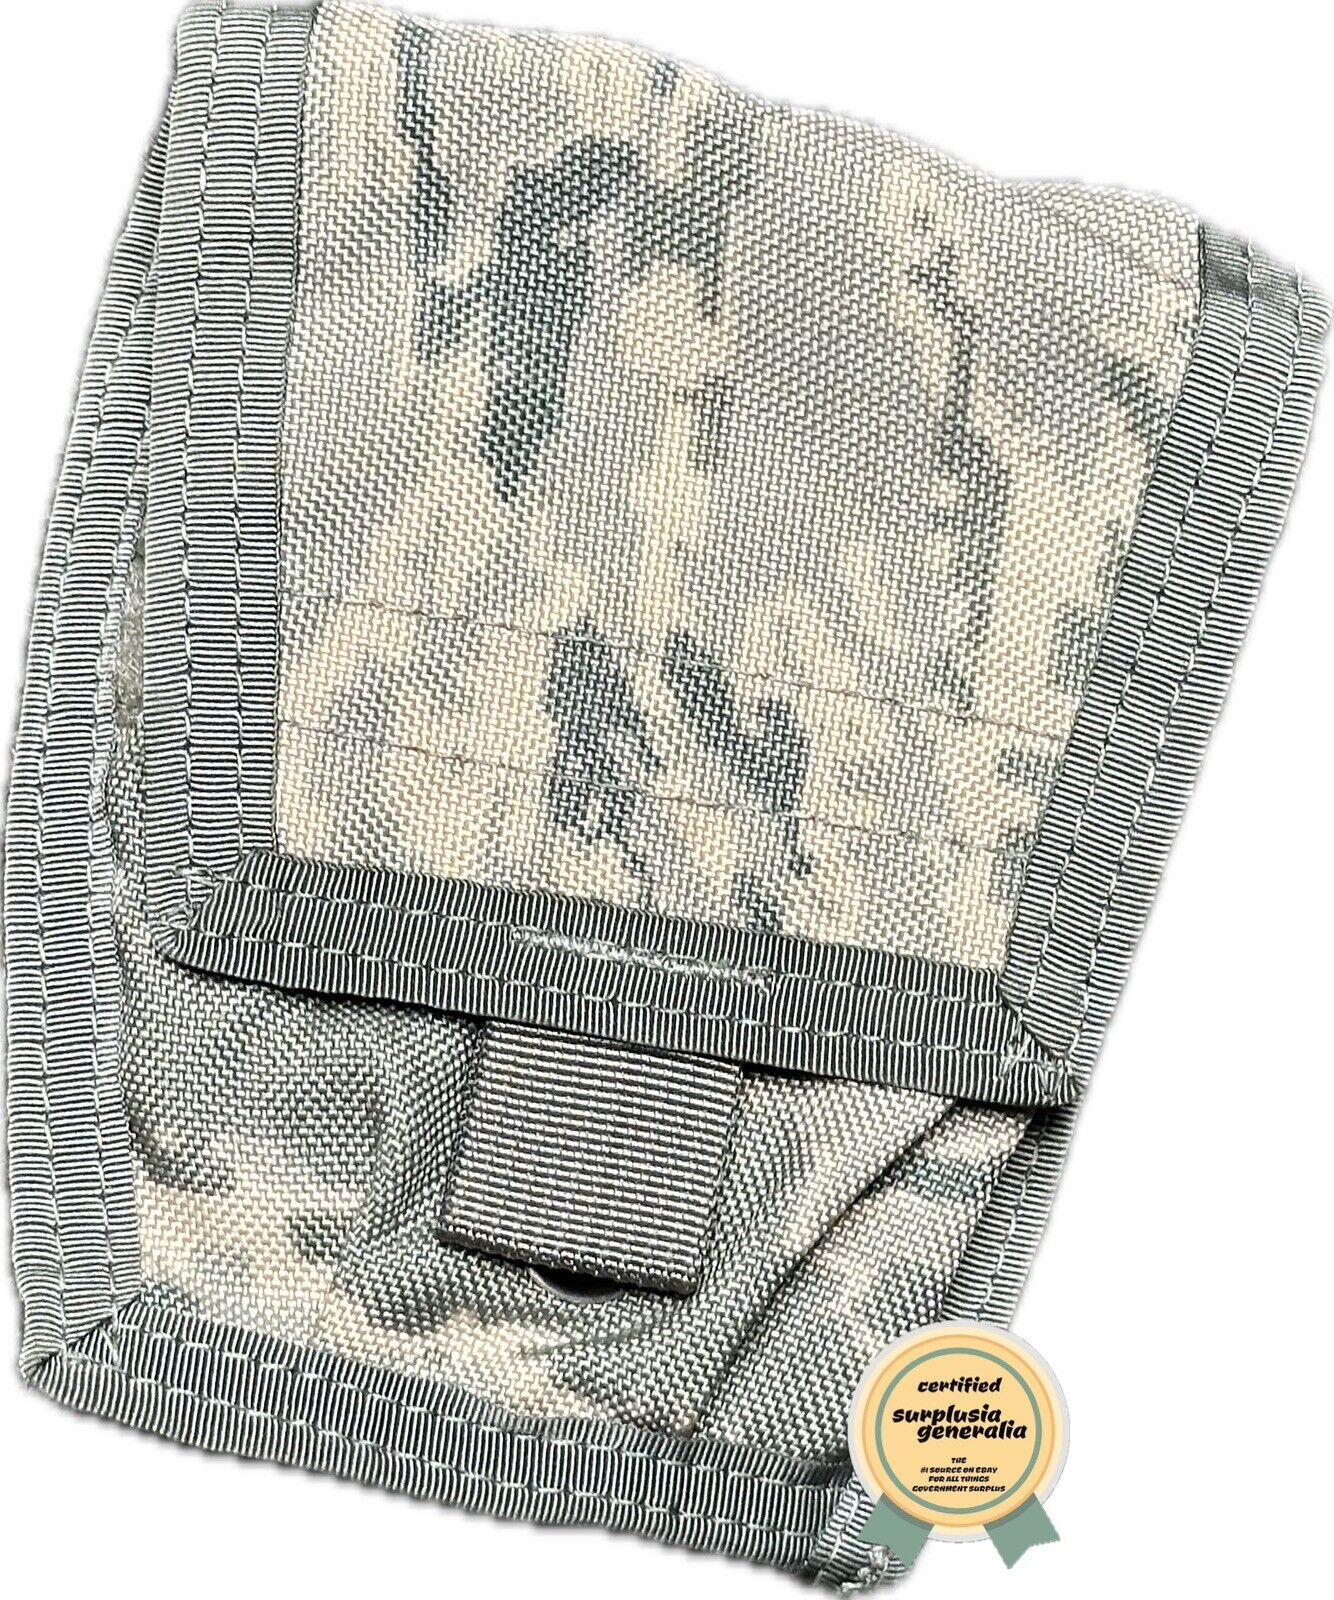 USAF Issue Defensor-Fortis LCS Handcuff Pouch ABU/TigerStripe